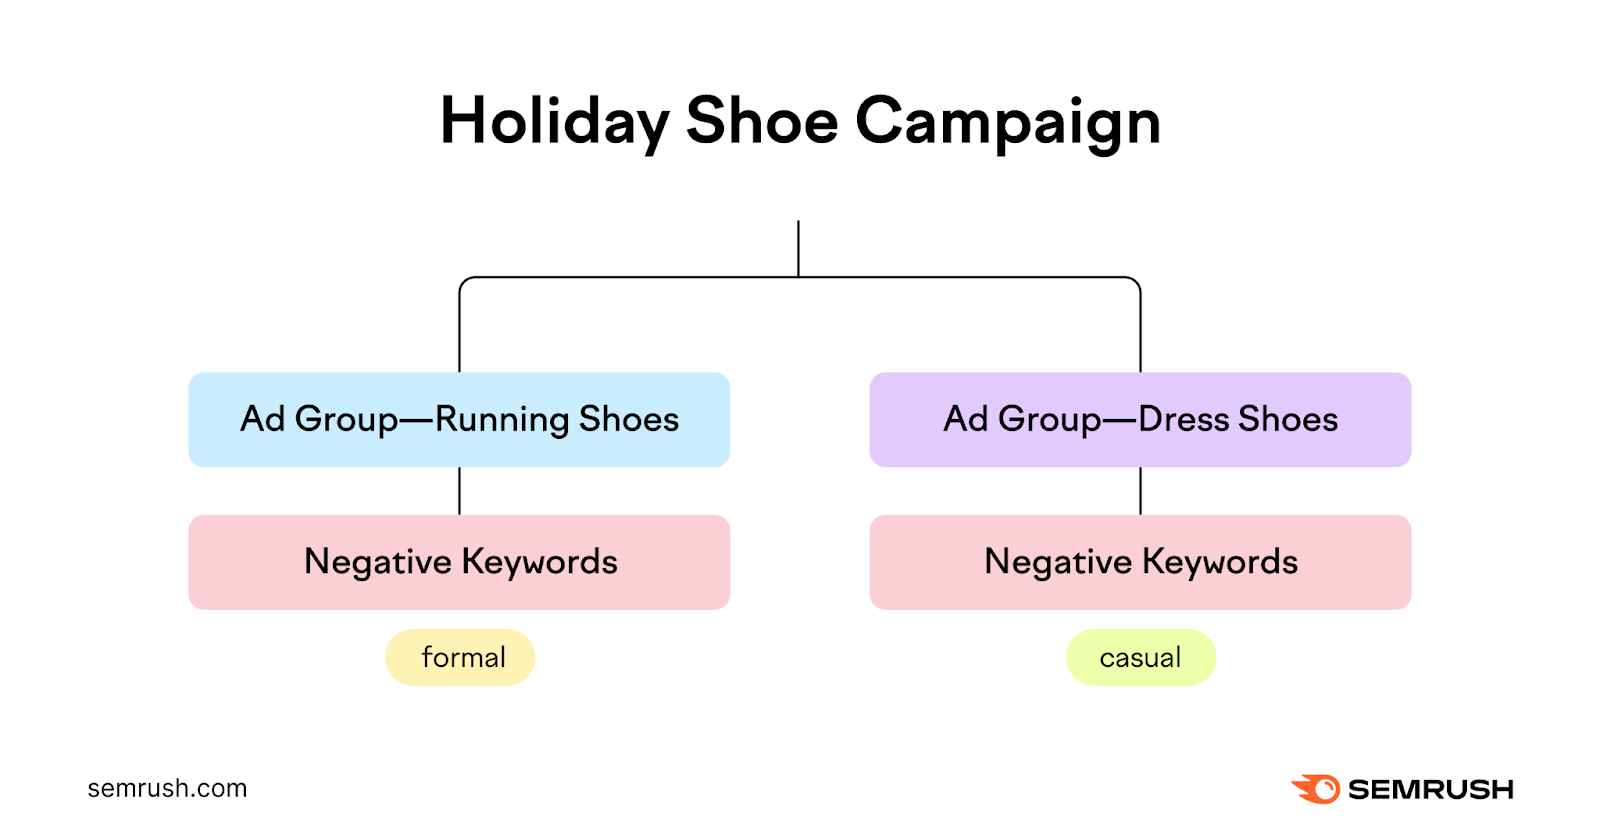 a visual representation of "Holiday shoe campaign" with "formal" and "casual" negative keywords